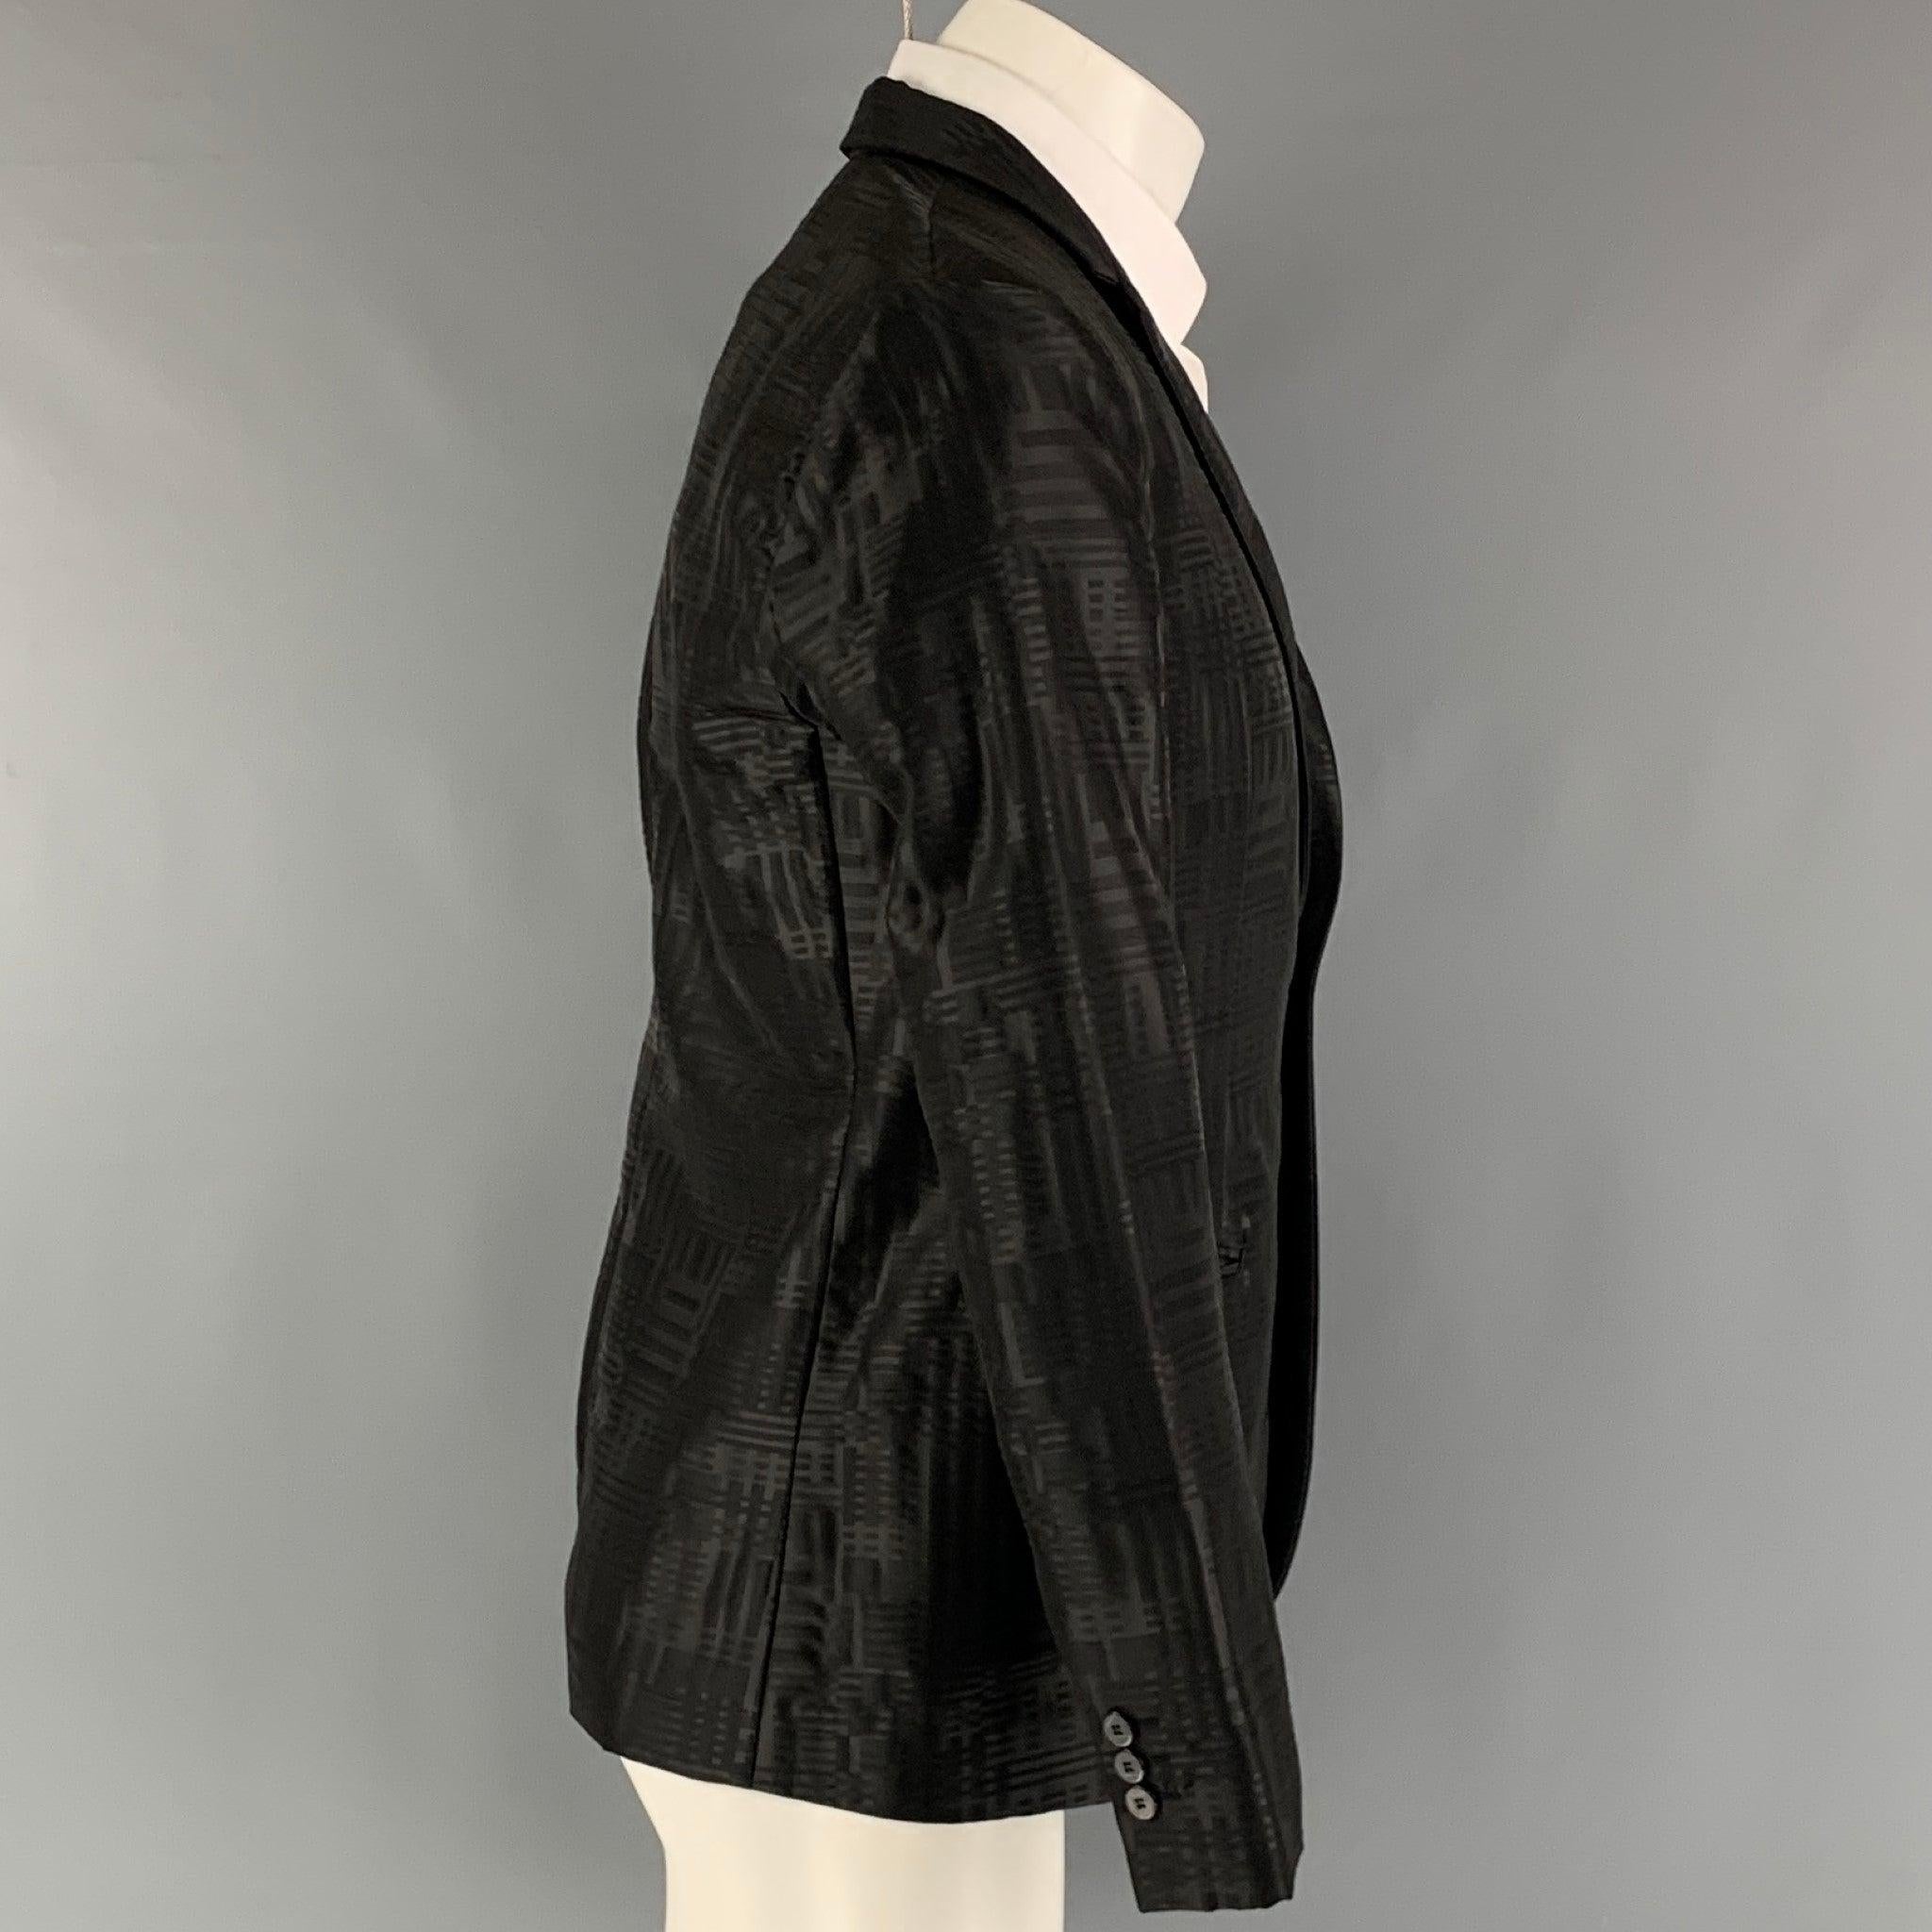 EMPORIO ARMANI sport coat comes in black jacquard wool blend woven material with no lining featuring a notch lapel, welt pockets, and a single button closure. Made in Italy. Excellent Pre-Owned Condition. 

Marked:   48 

Measurements: 
 
Shoulder: